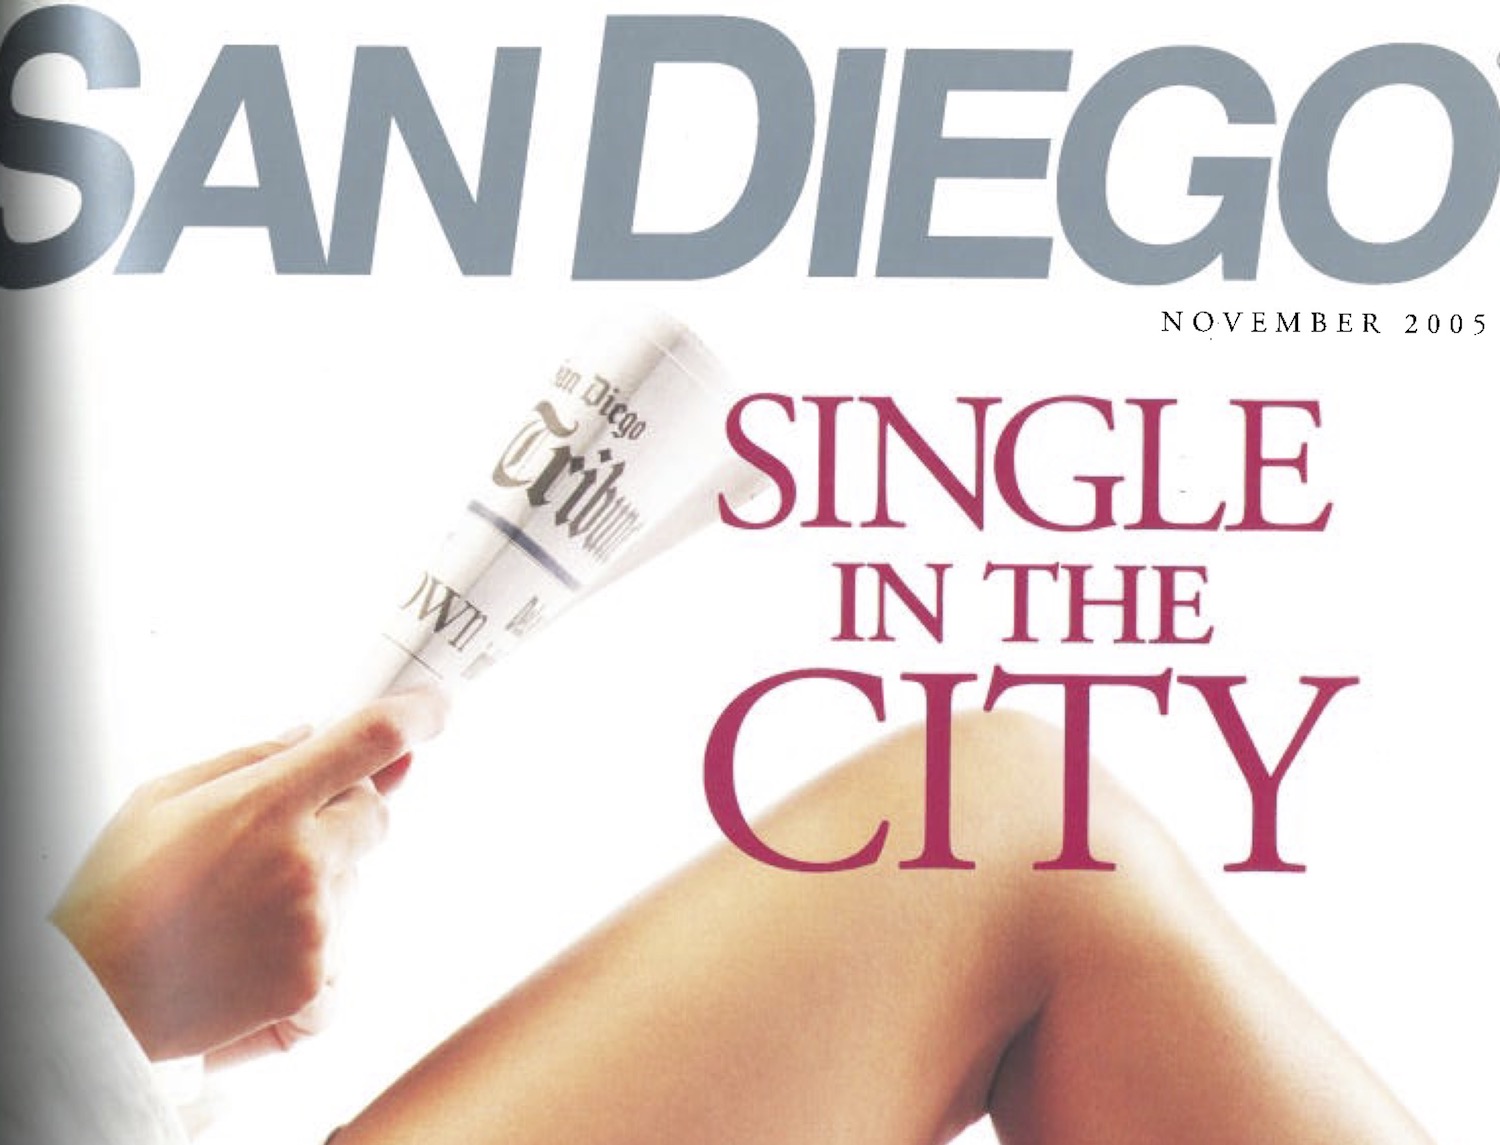 San Diego Magazine cover 2005 focused on dating in San Diego